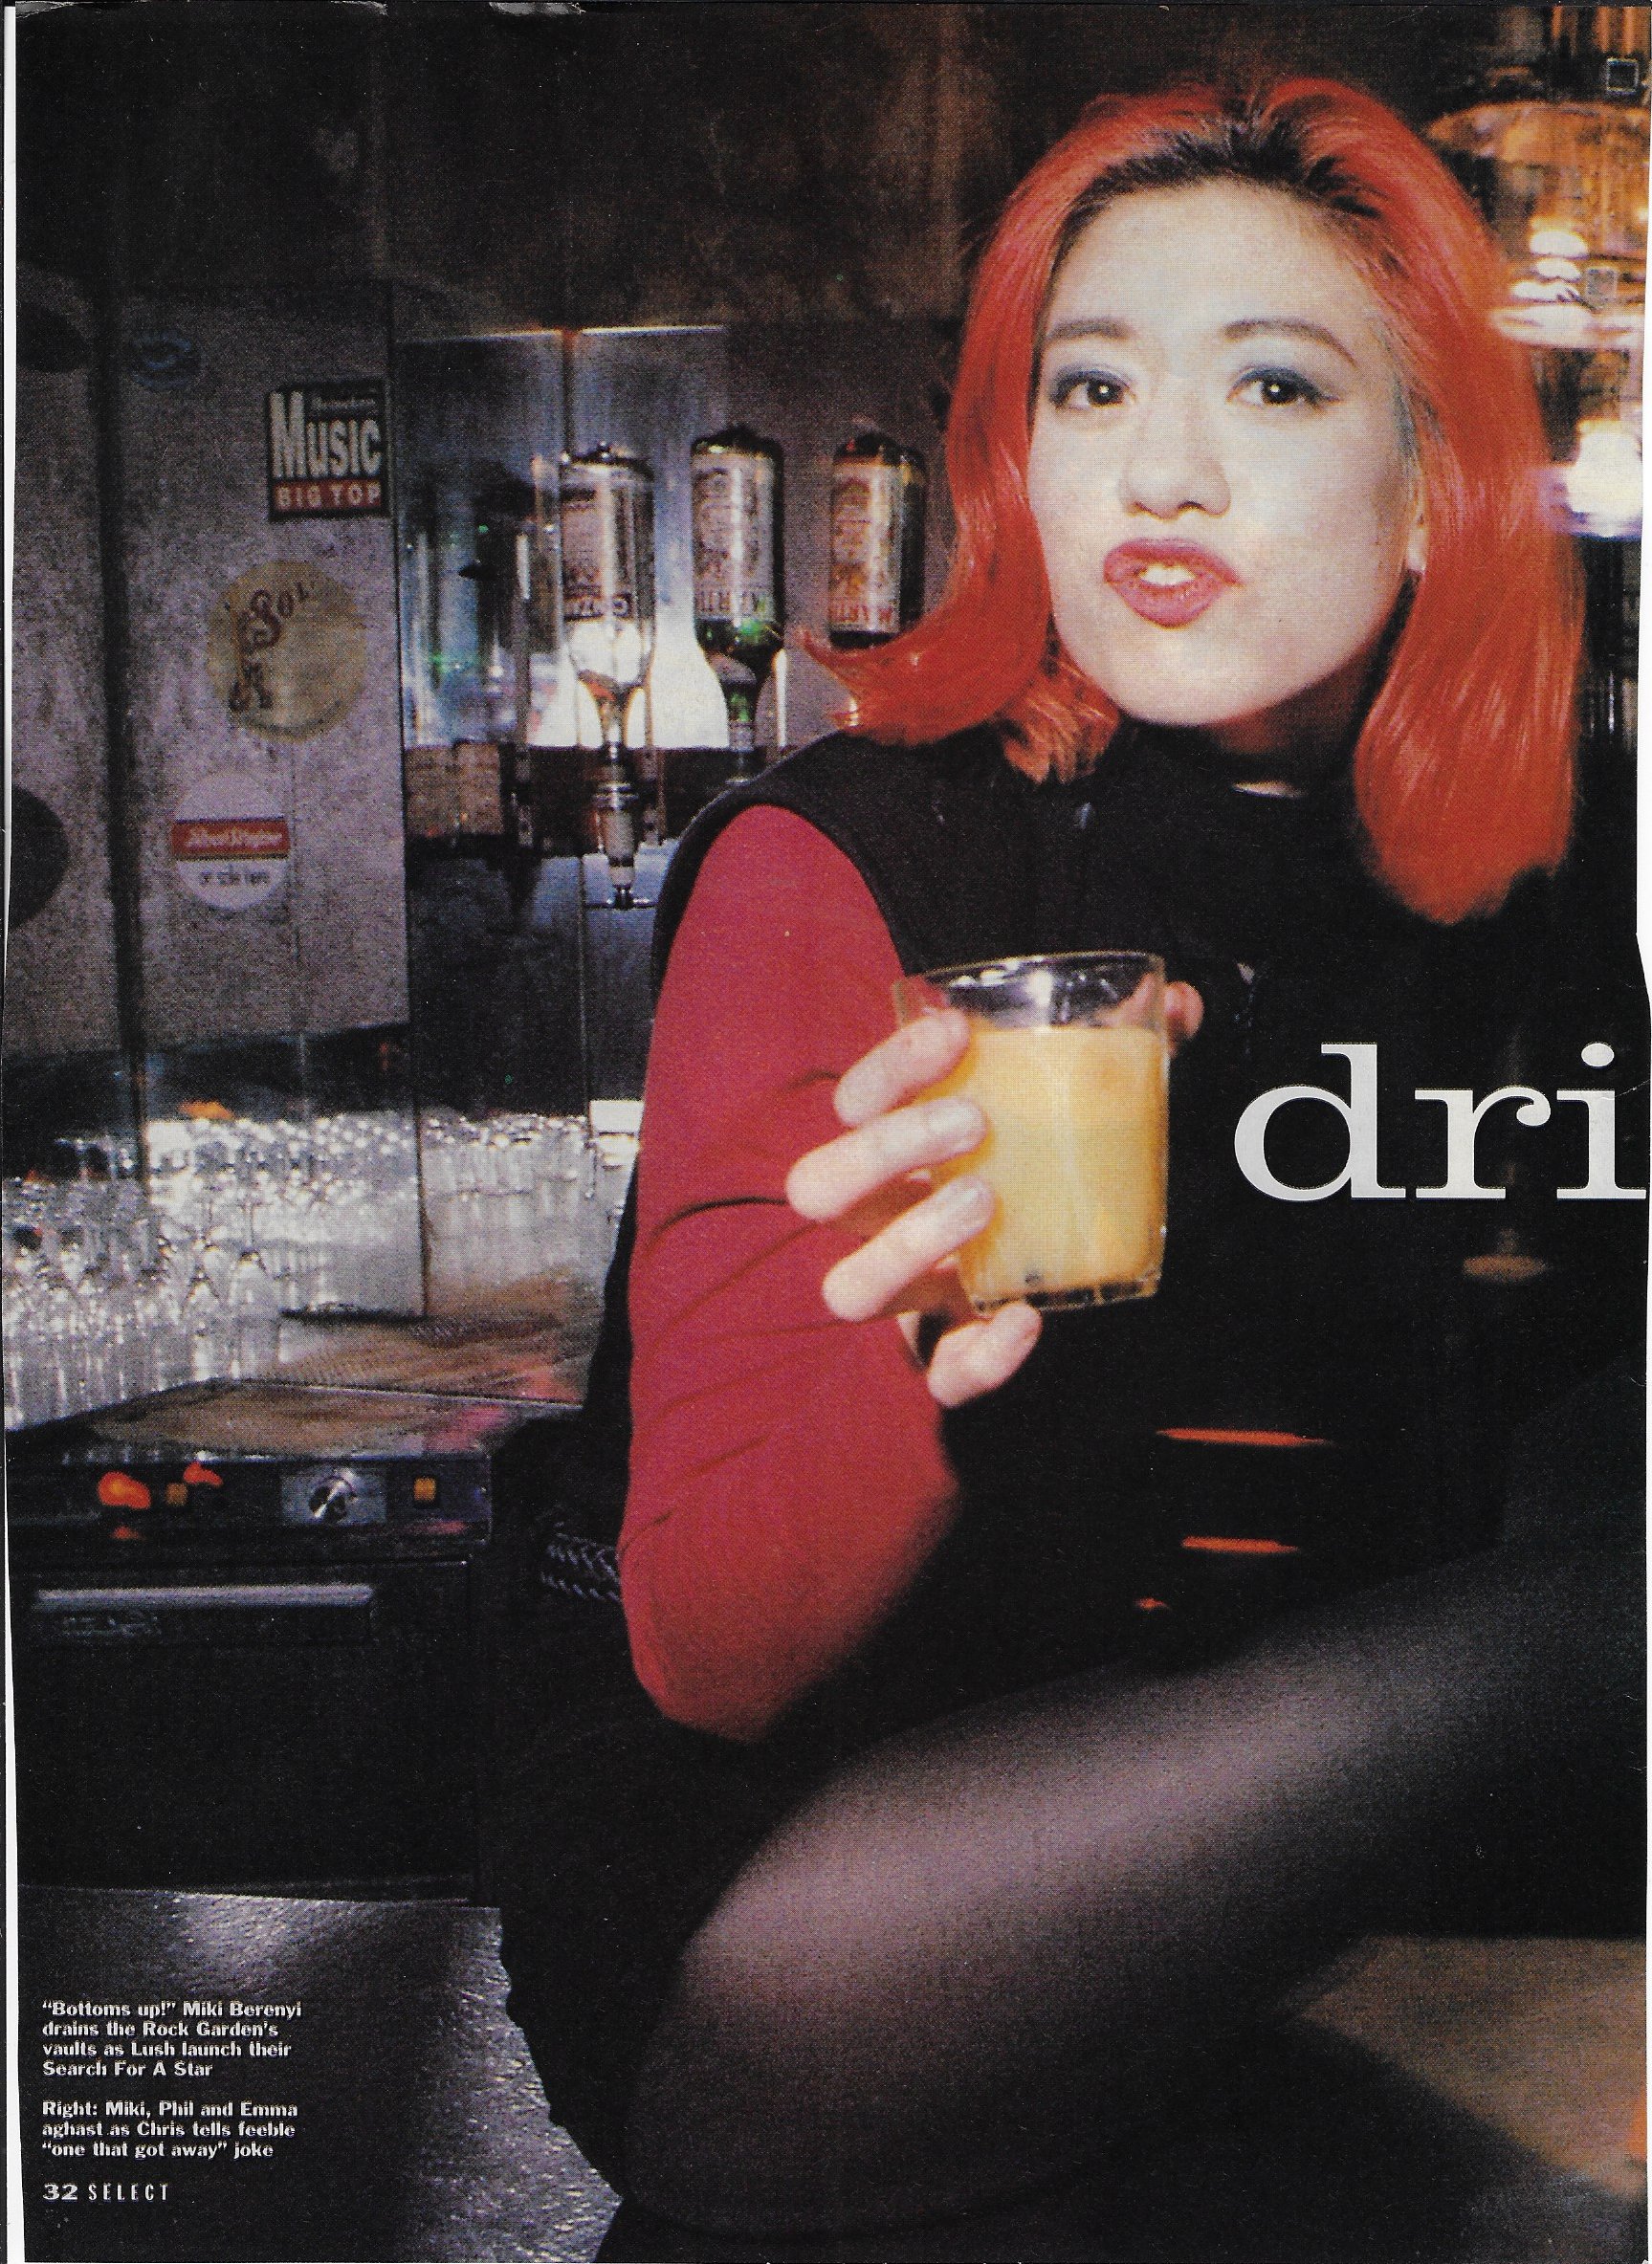 Miki Berenyi It S True I Ve Had A Couple Of Martinis But Reading Through This Has Make Me Laugh Out Loud At The Stupid Fun We Used To Have Together As